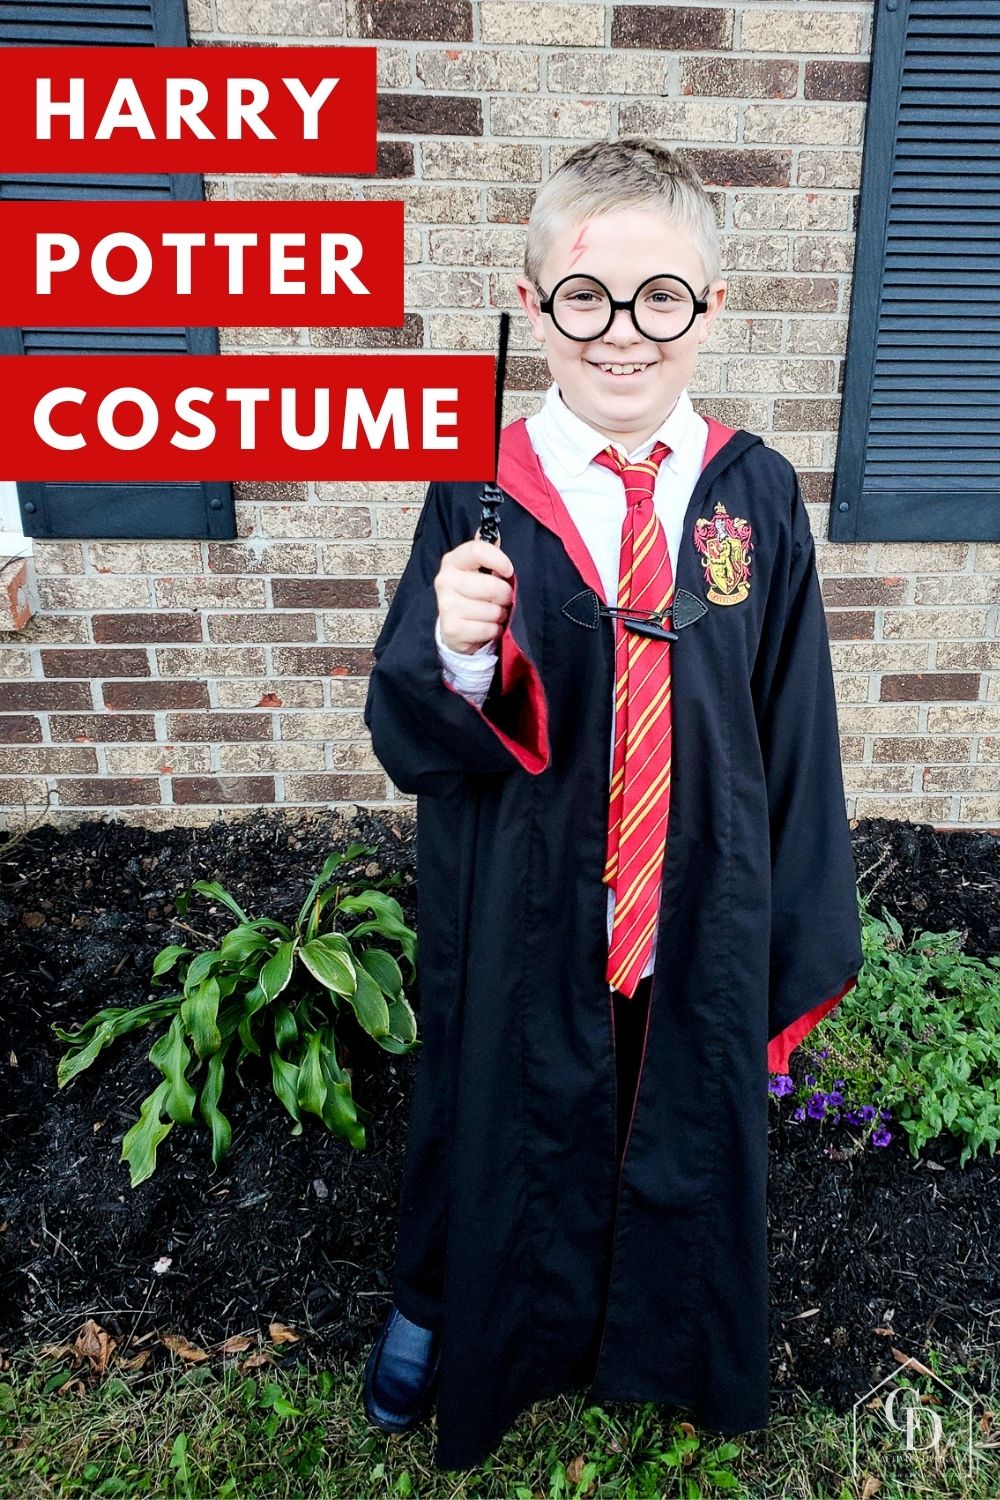 How To Make A Diy Harry Potter Costume